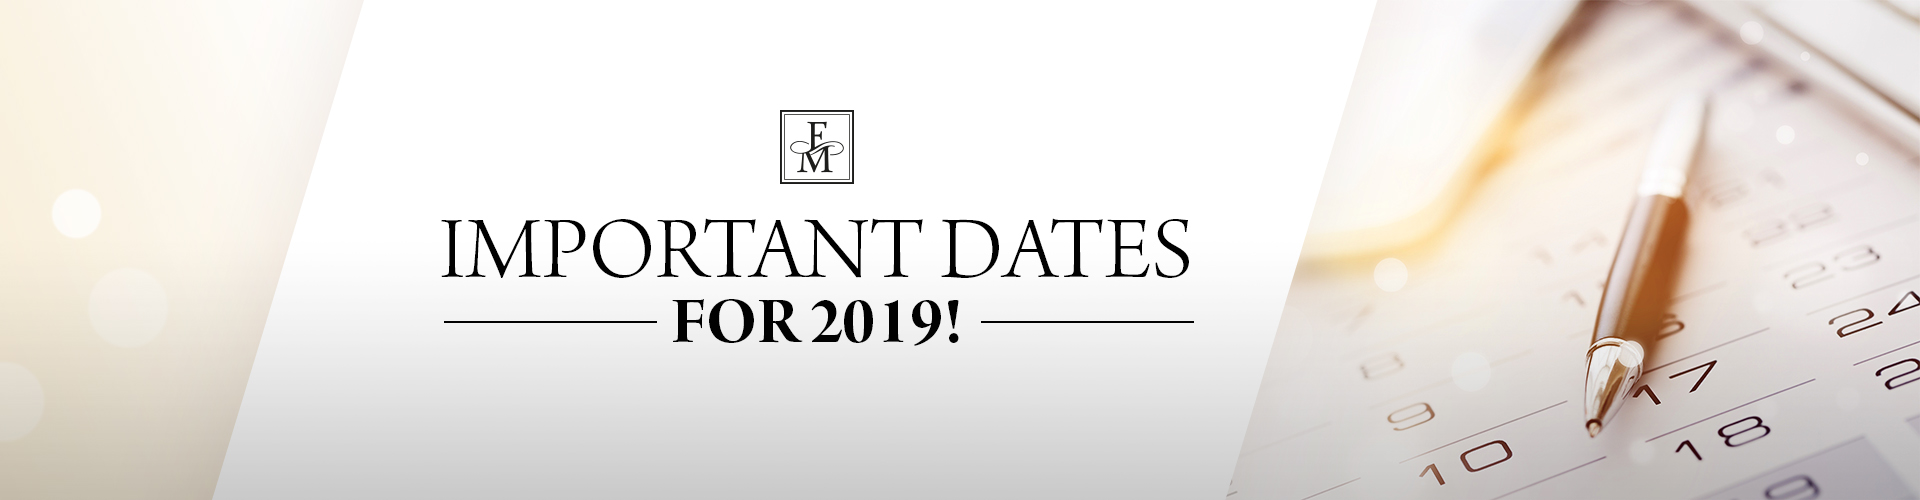 Important dates for FM World in 2019! 